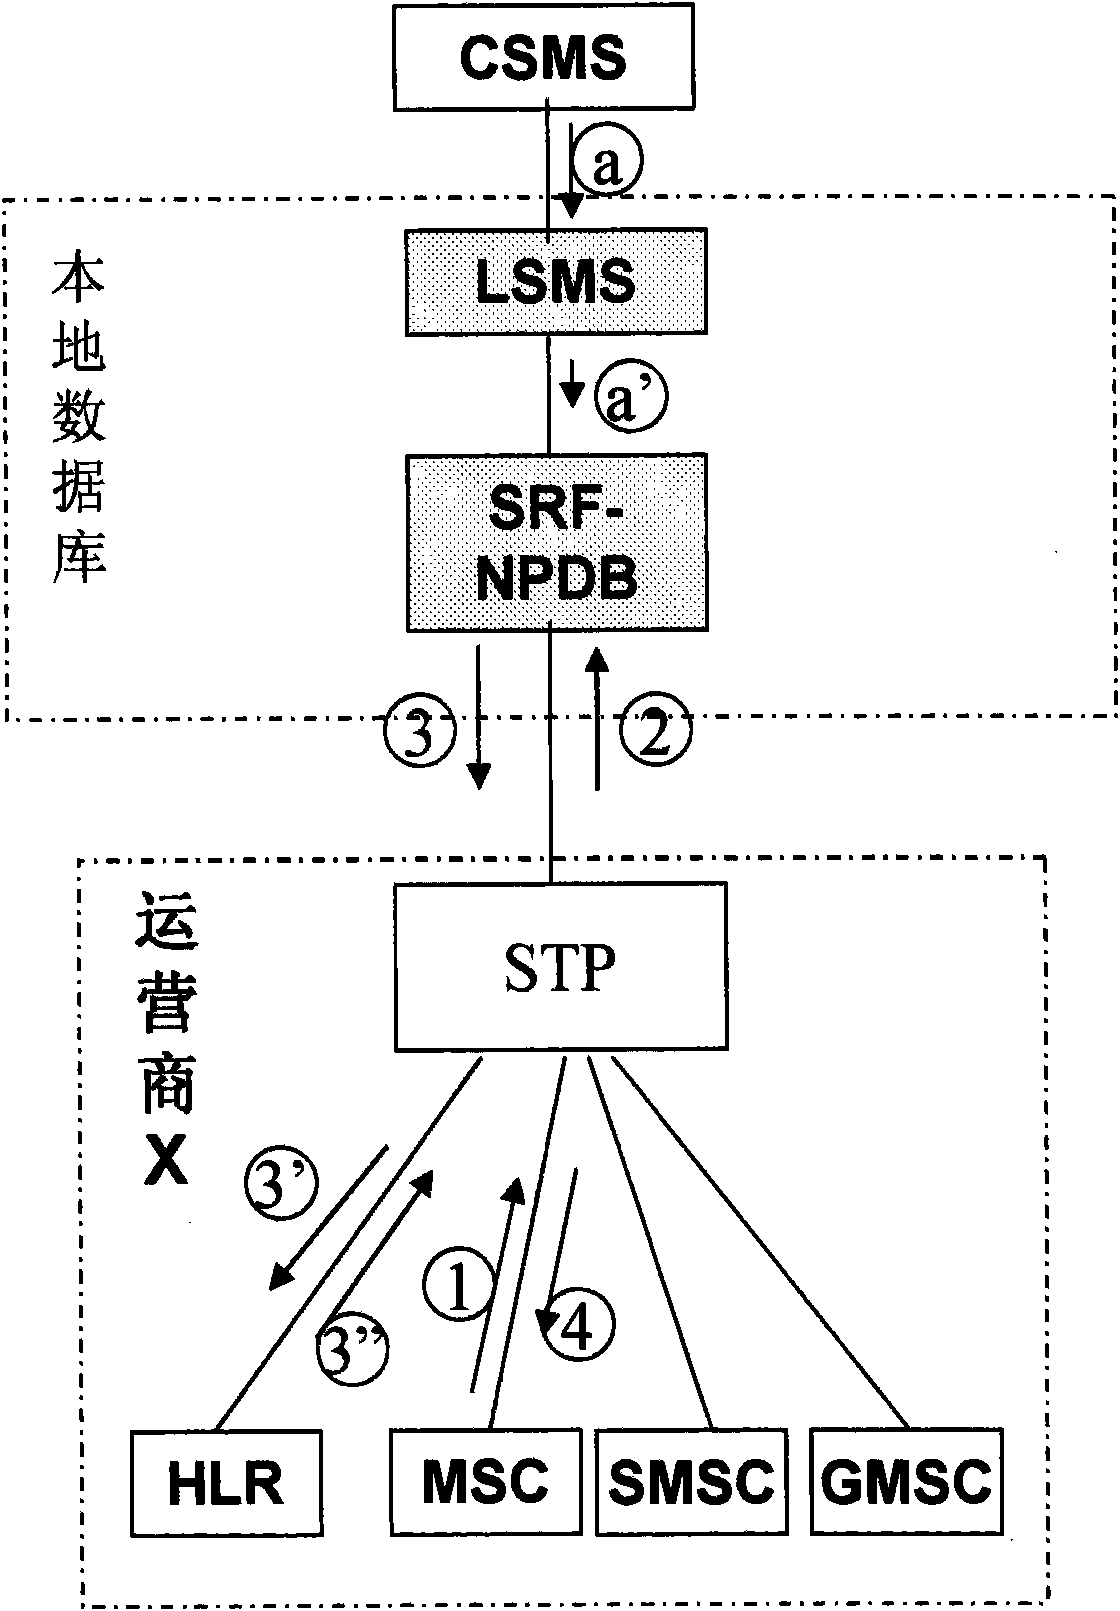 Mobile network number portability service method